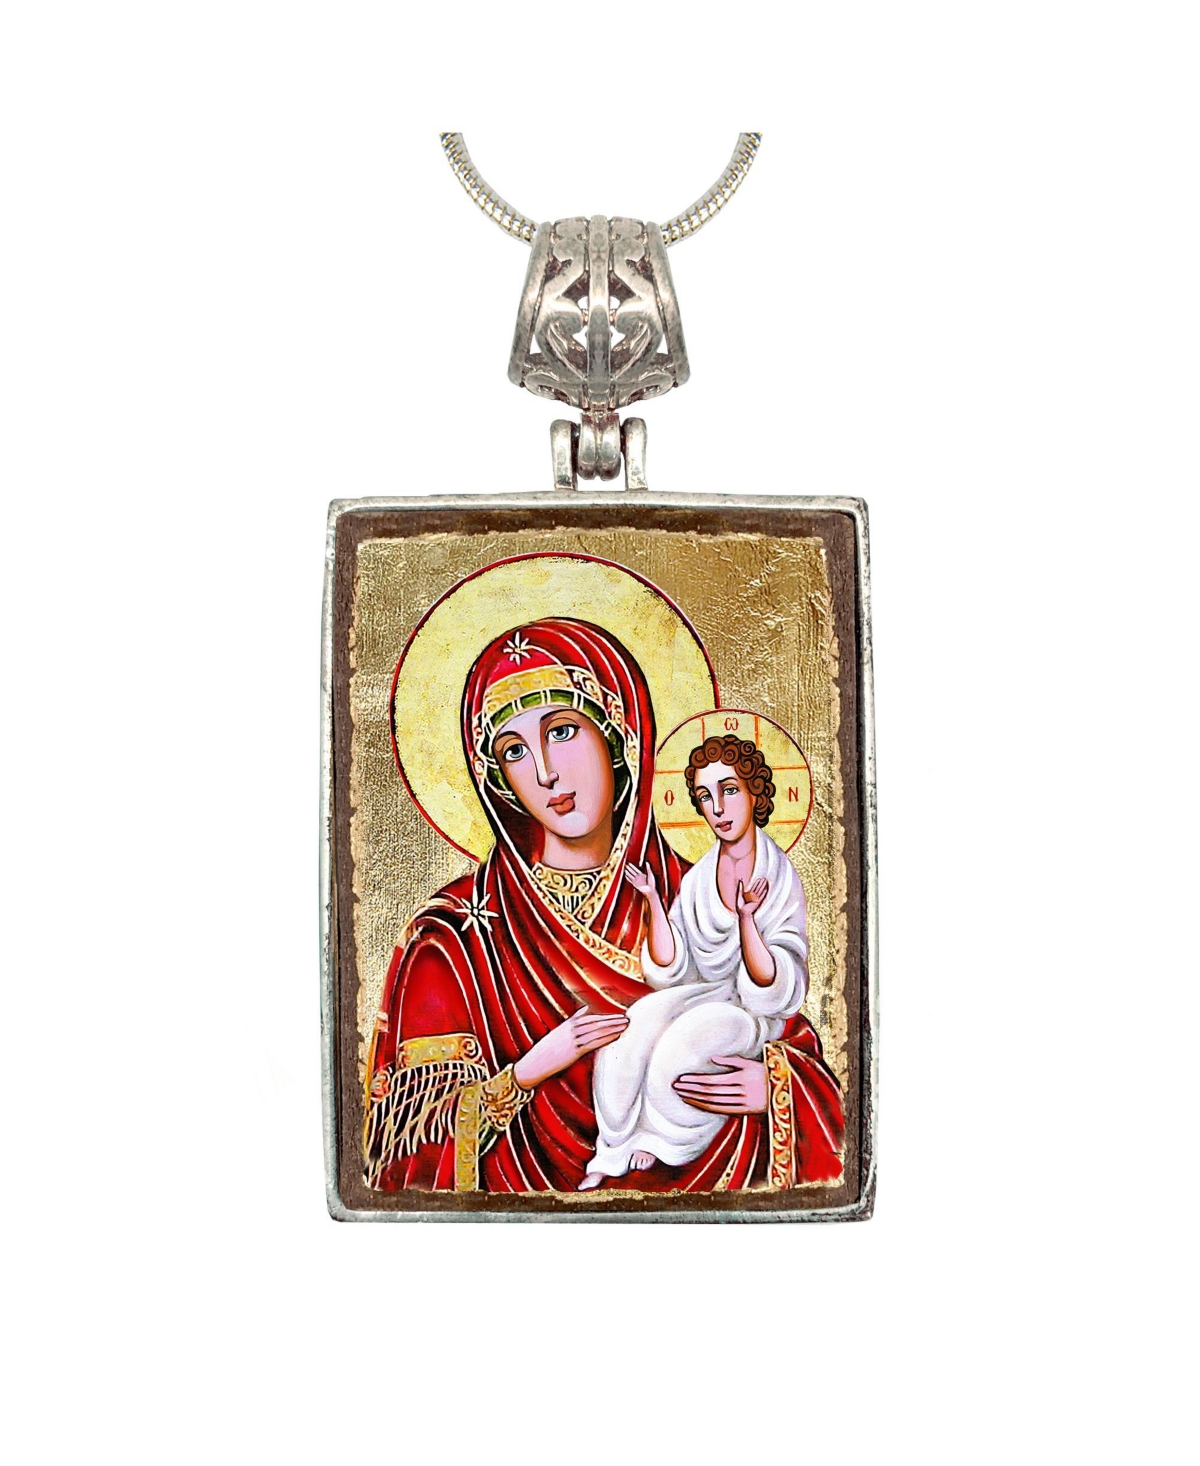 Virgin Mary Directress Religious Holiday Jewelry Necklace Monastery Icons - Multi Color